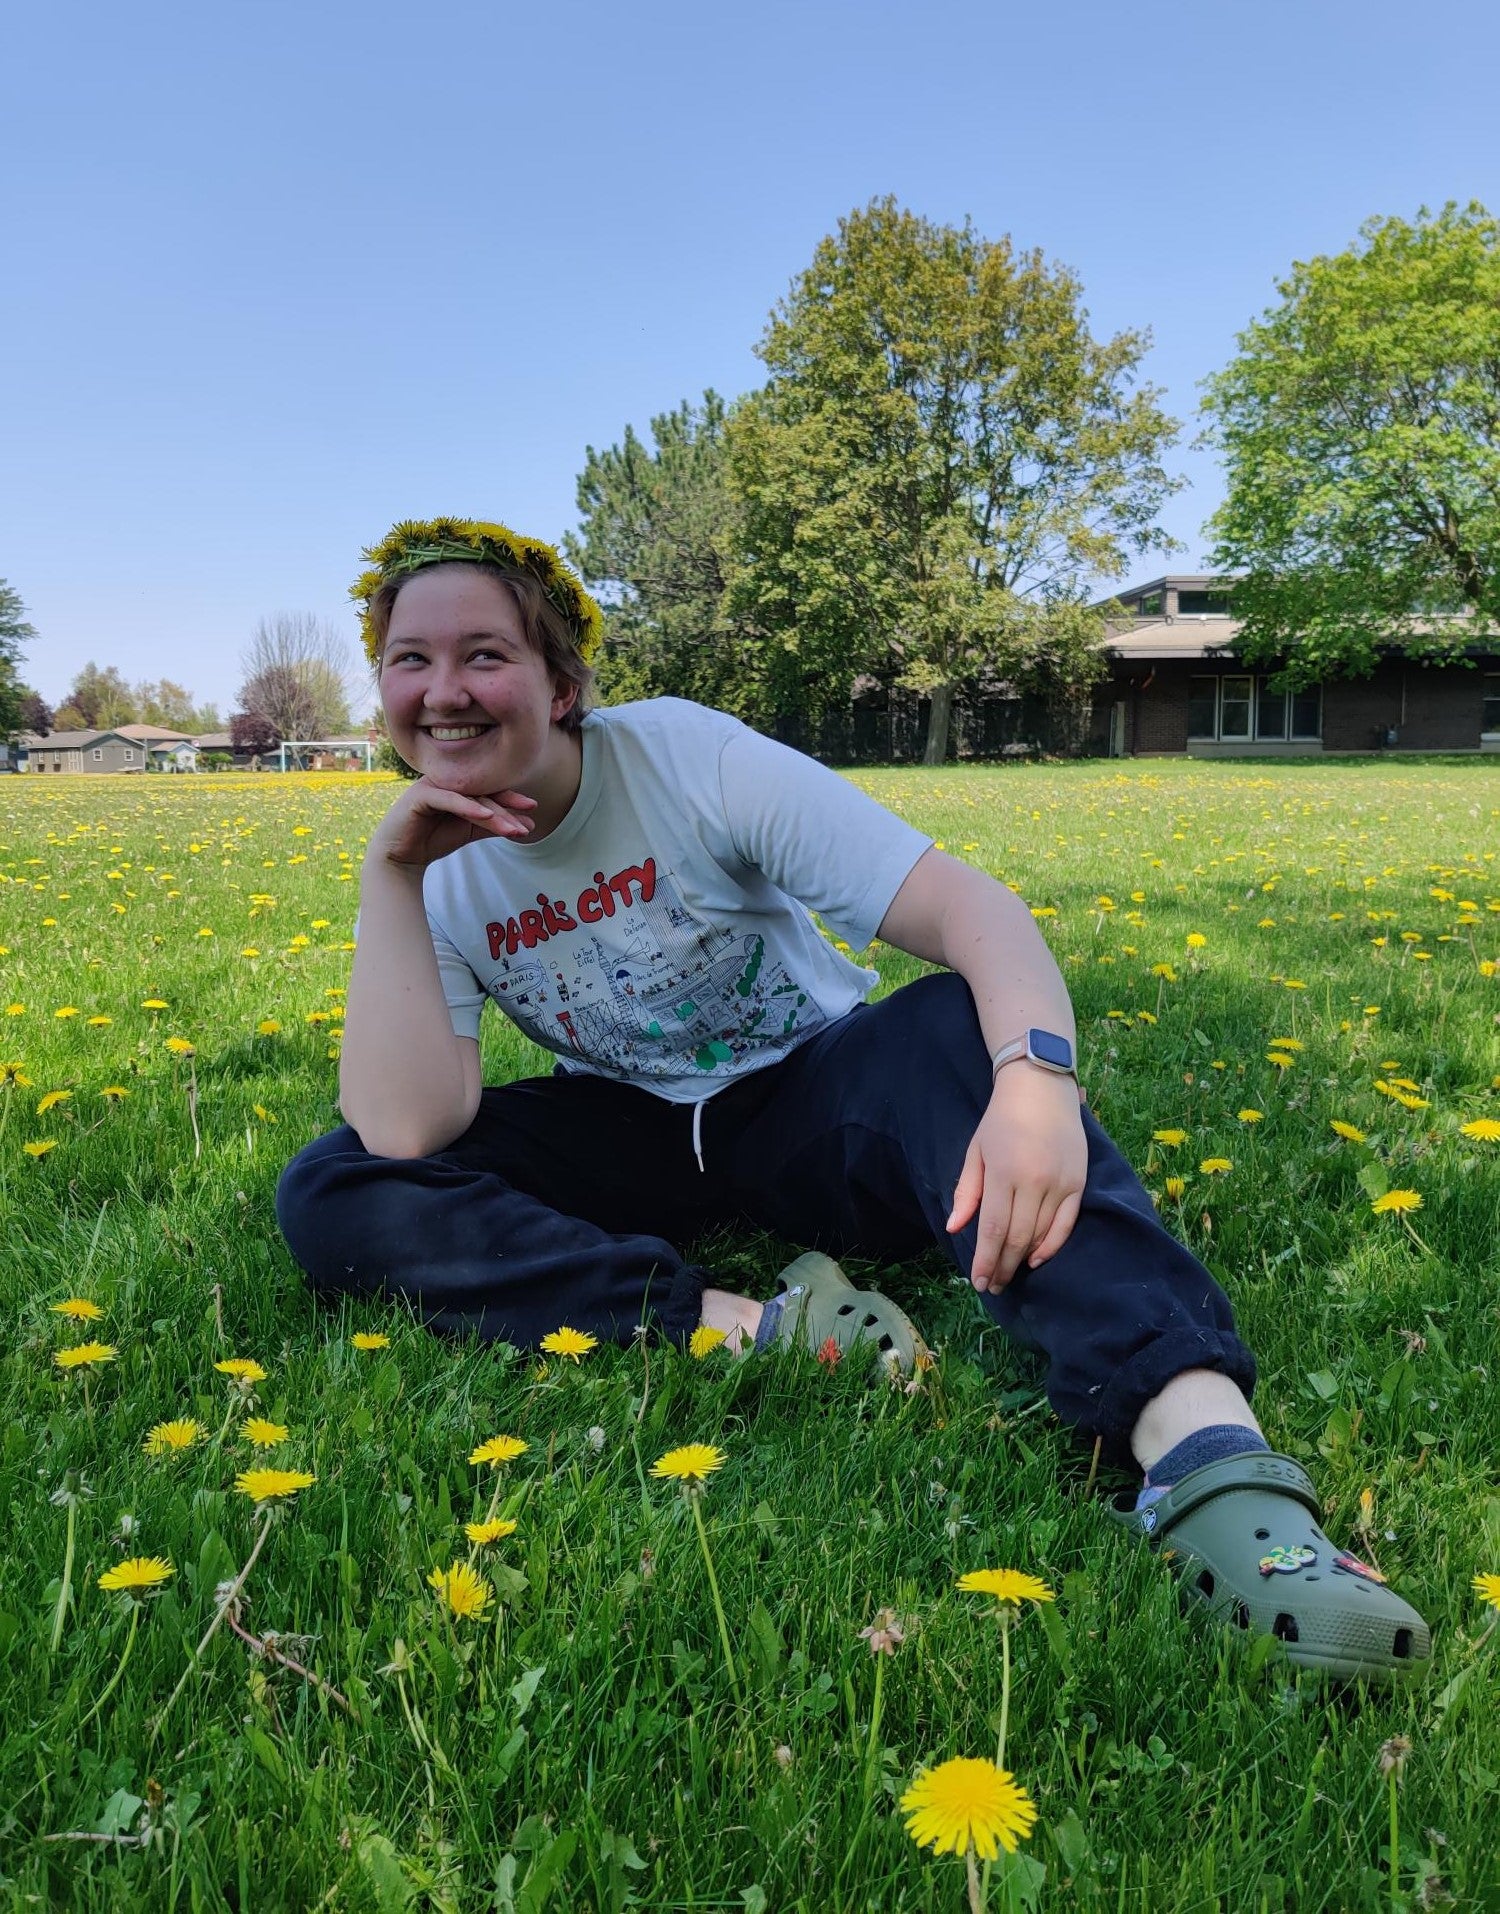 A photo of Charlie sitting outside on the grass and smiling, with their hand underneath their chin.